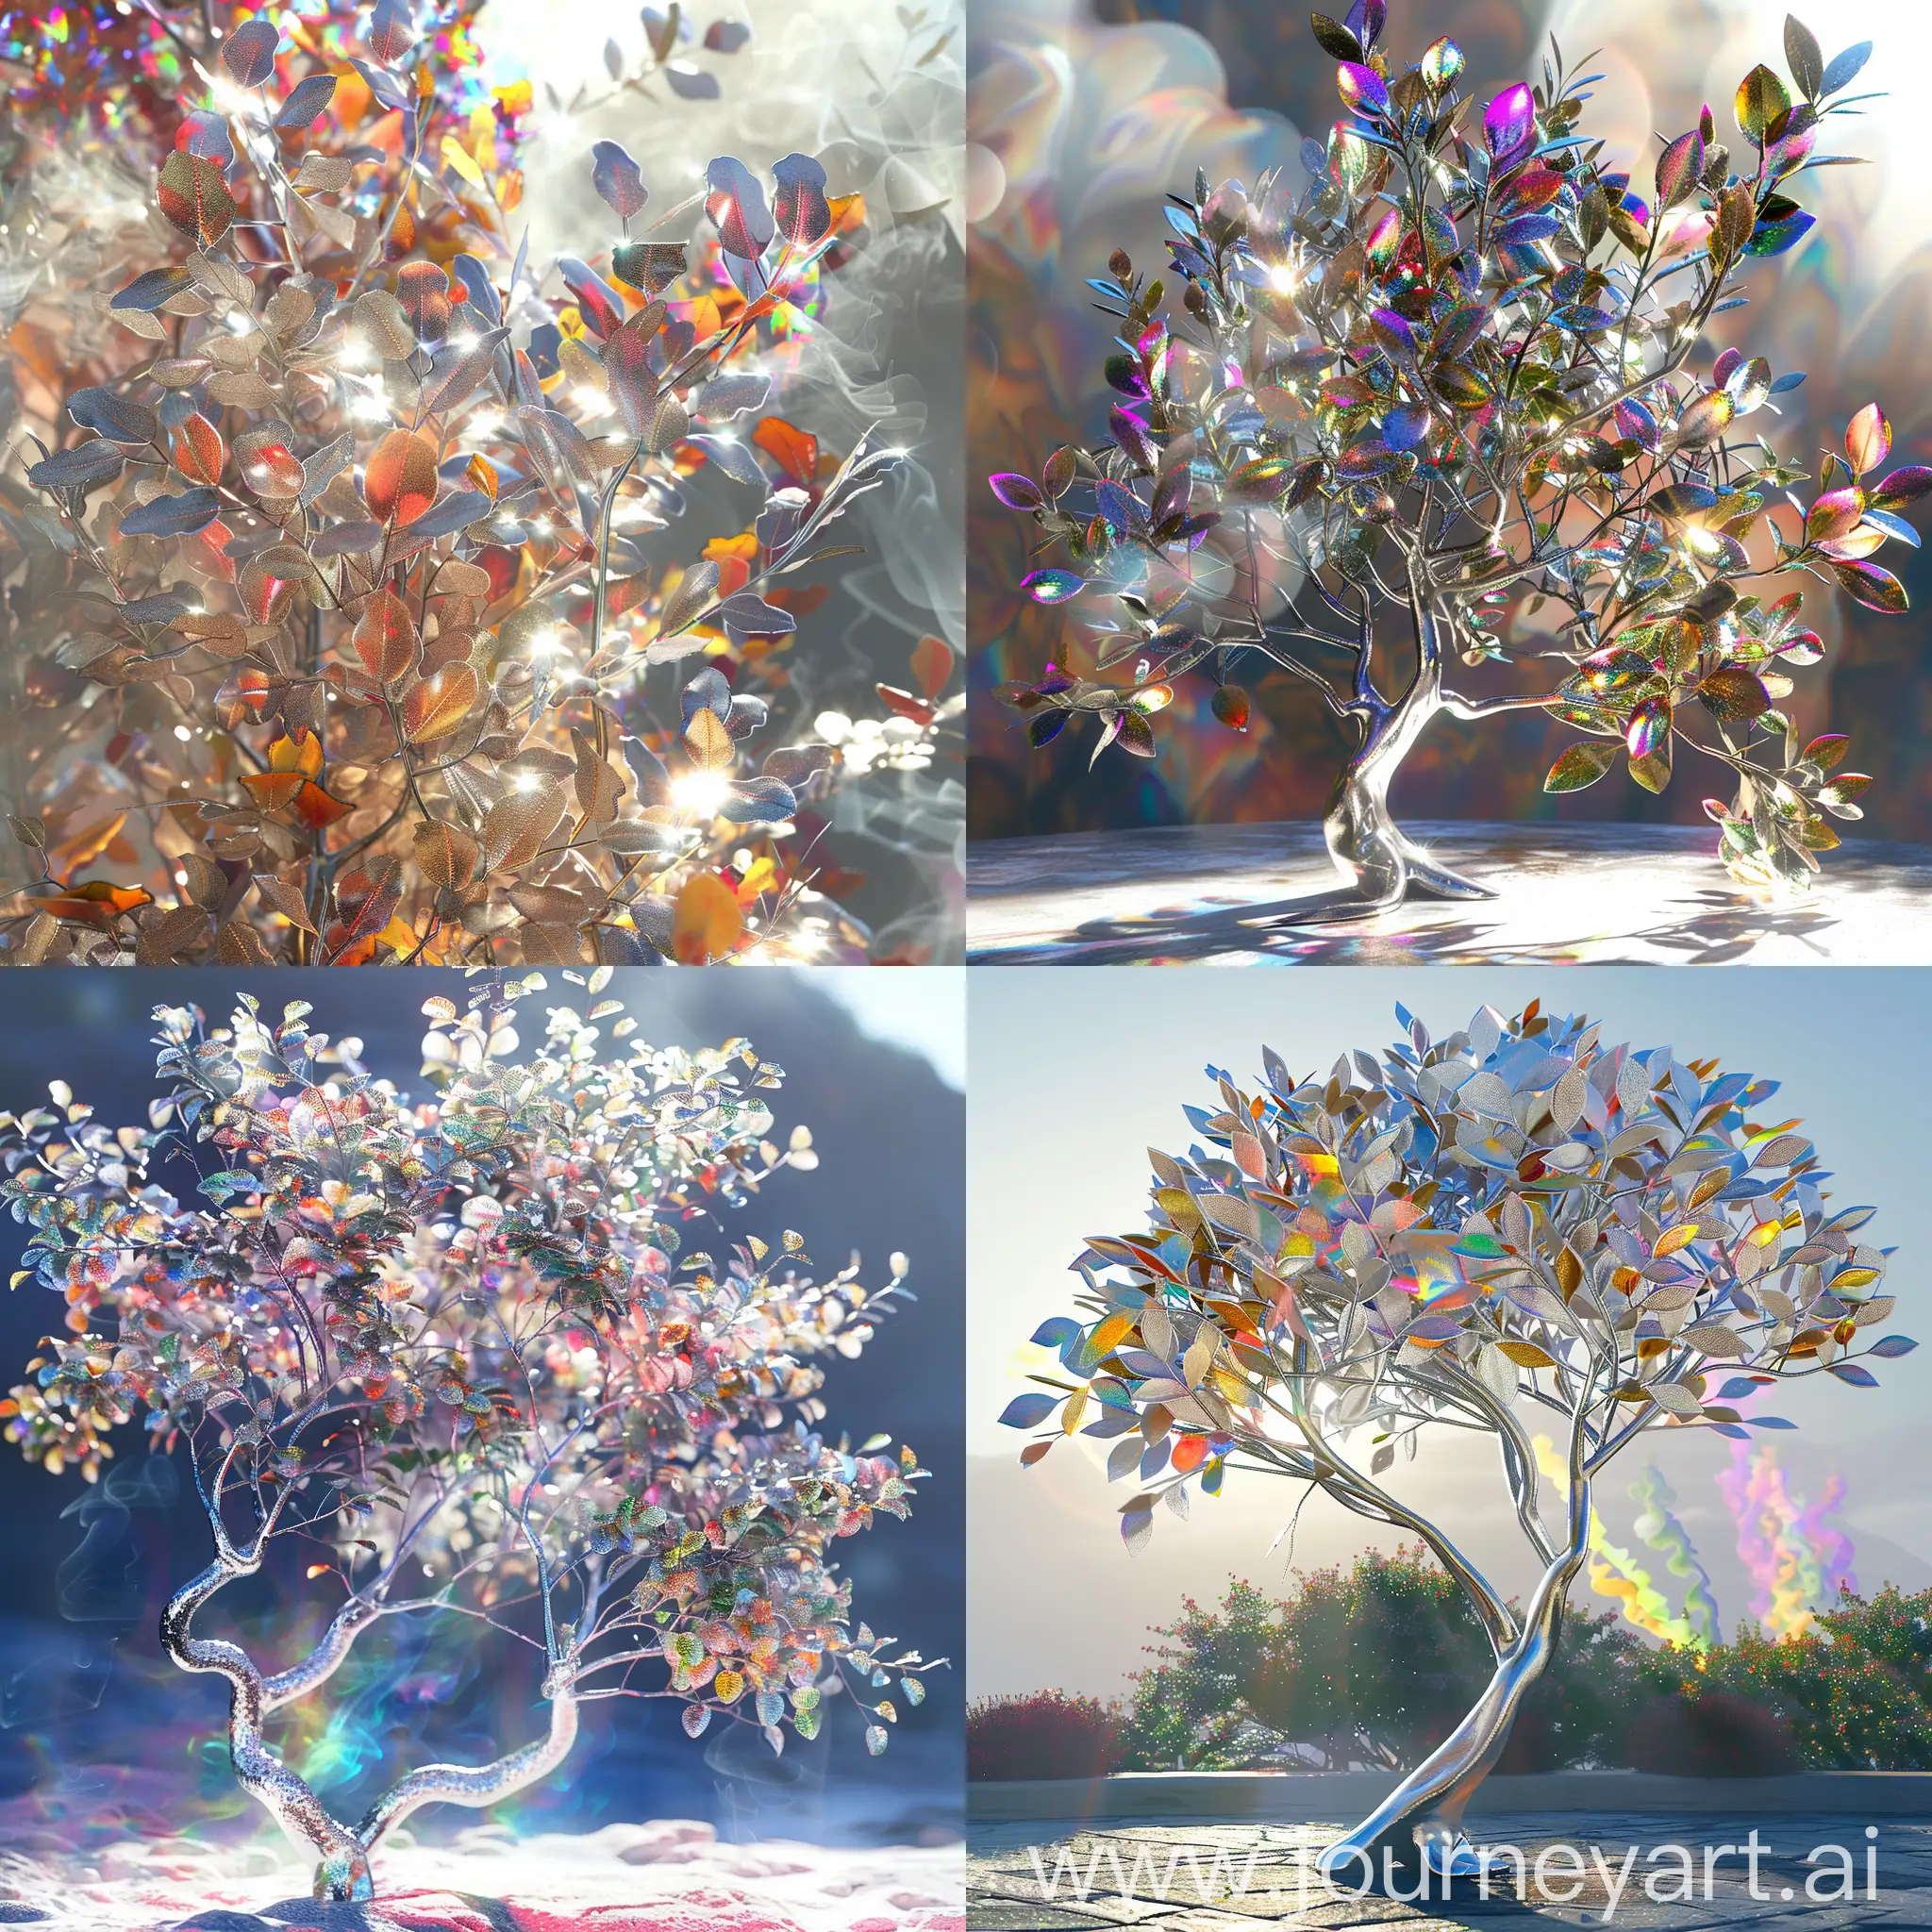 Vibrant-Silver-Tree-with-Colorful-Leaves-Illuminated-by-Sunlight